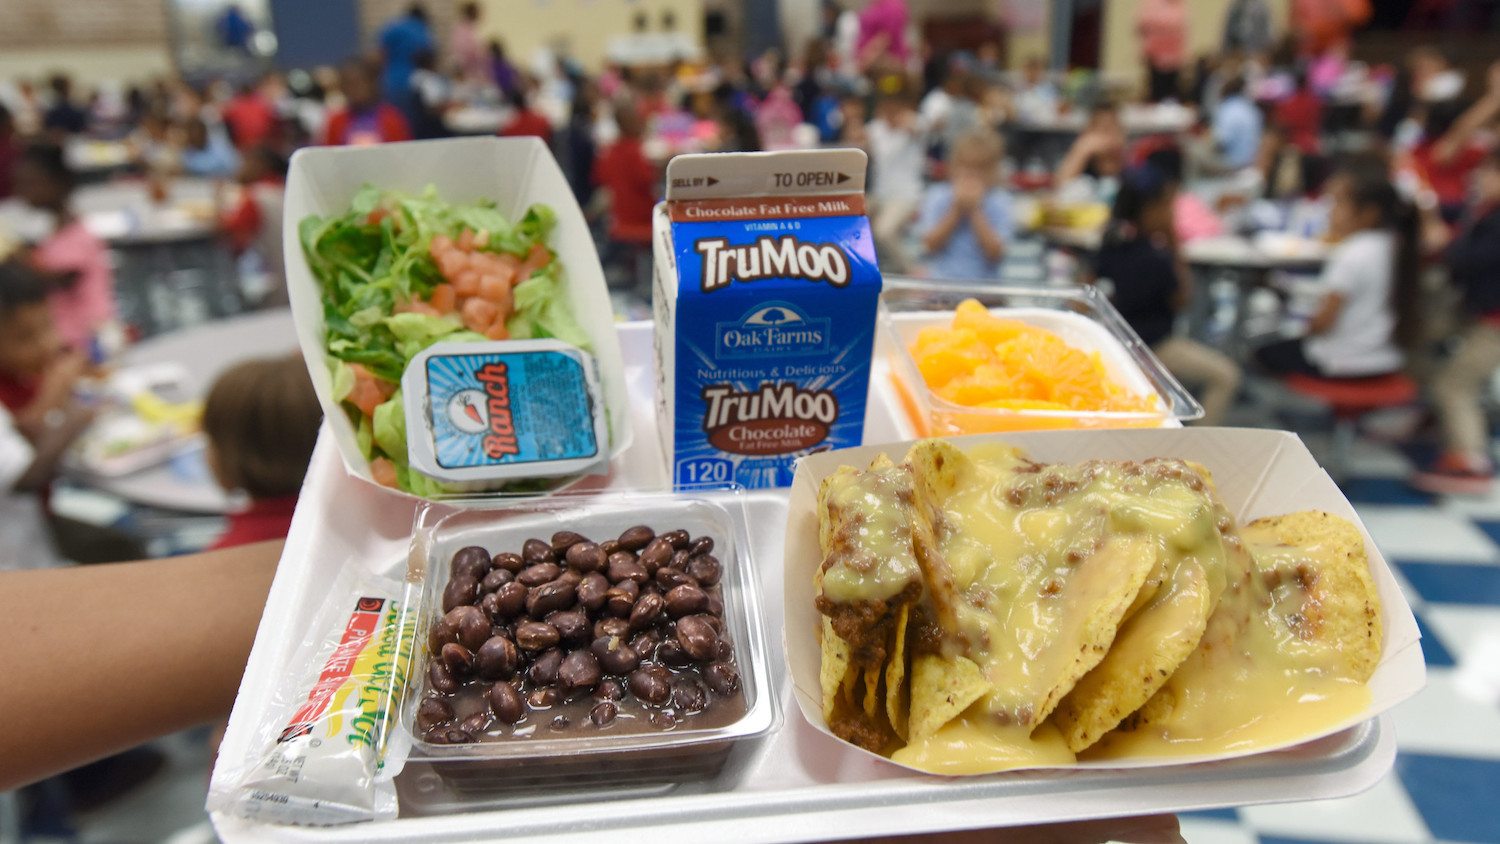 A school lunch tray carried to a cafeteria table with nachos, beans, salad, fruit, and chocolate milk. November 2020